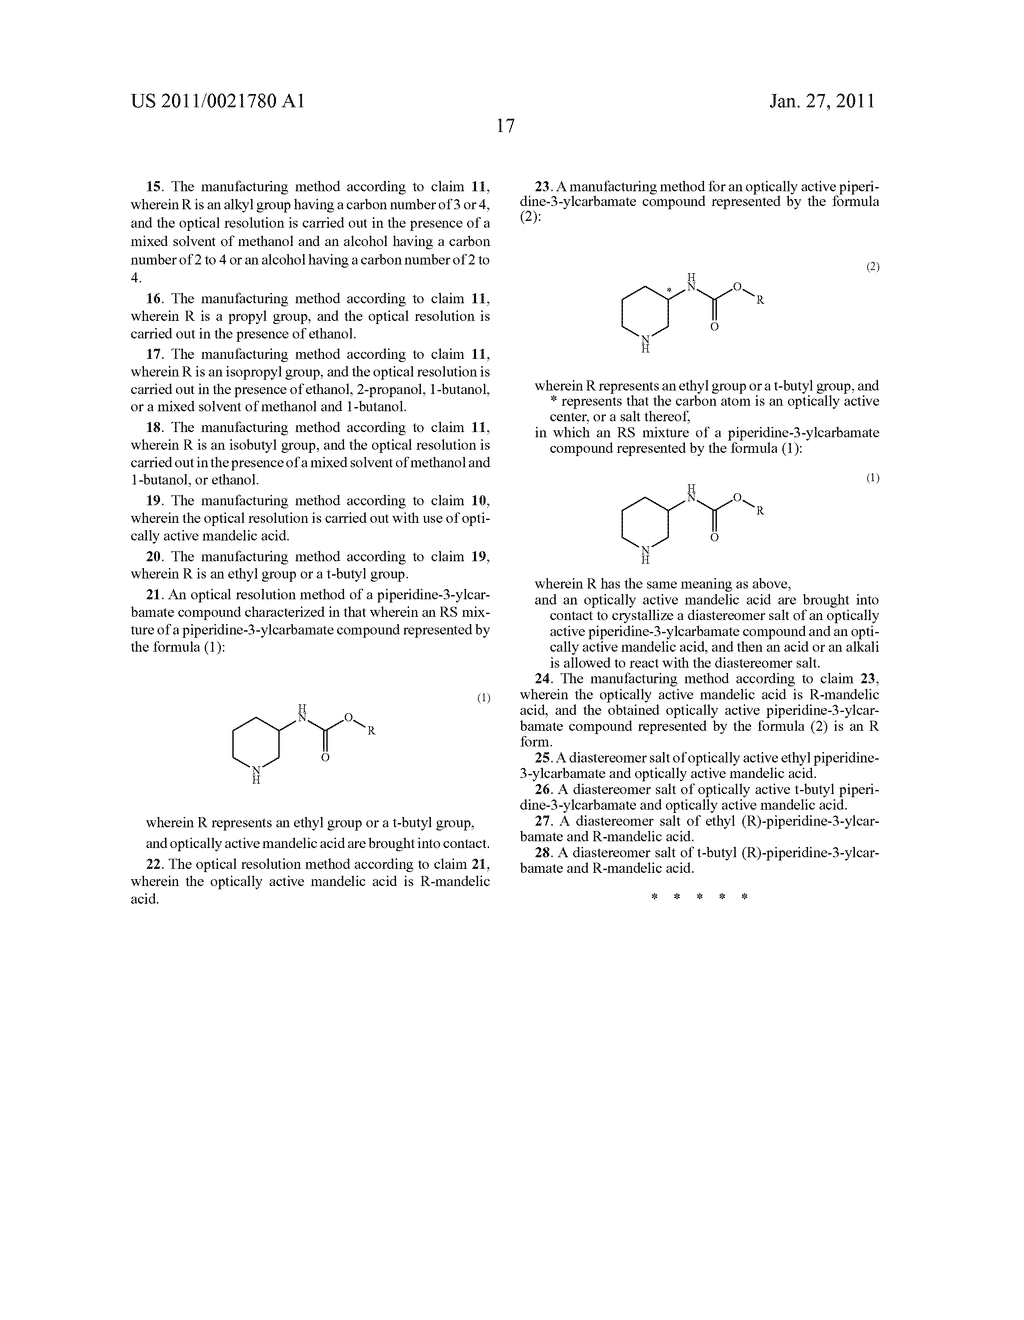 MANUFACTURING METHOD FOR A PIPERIDINE-3-YLCARBAMATE COMPOUND AND OPTICAL RESOLUTION METHOD THEREFOR - diagram, schematic, and image 18